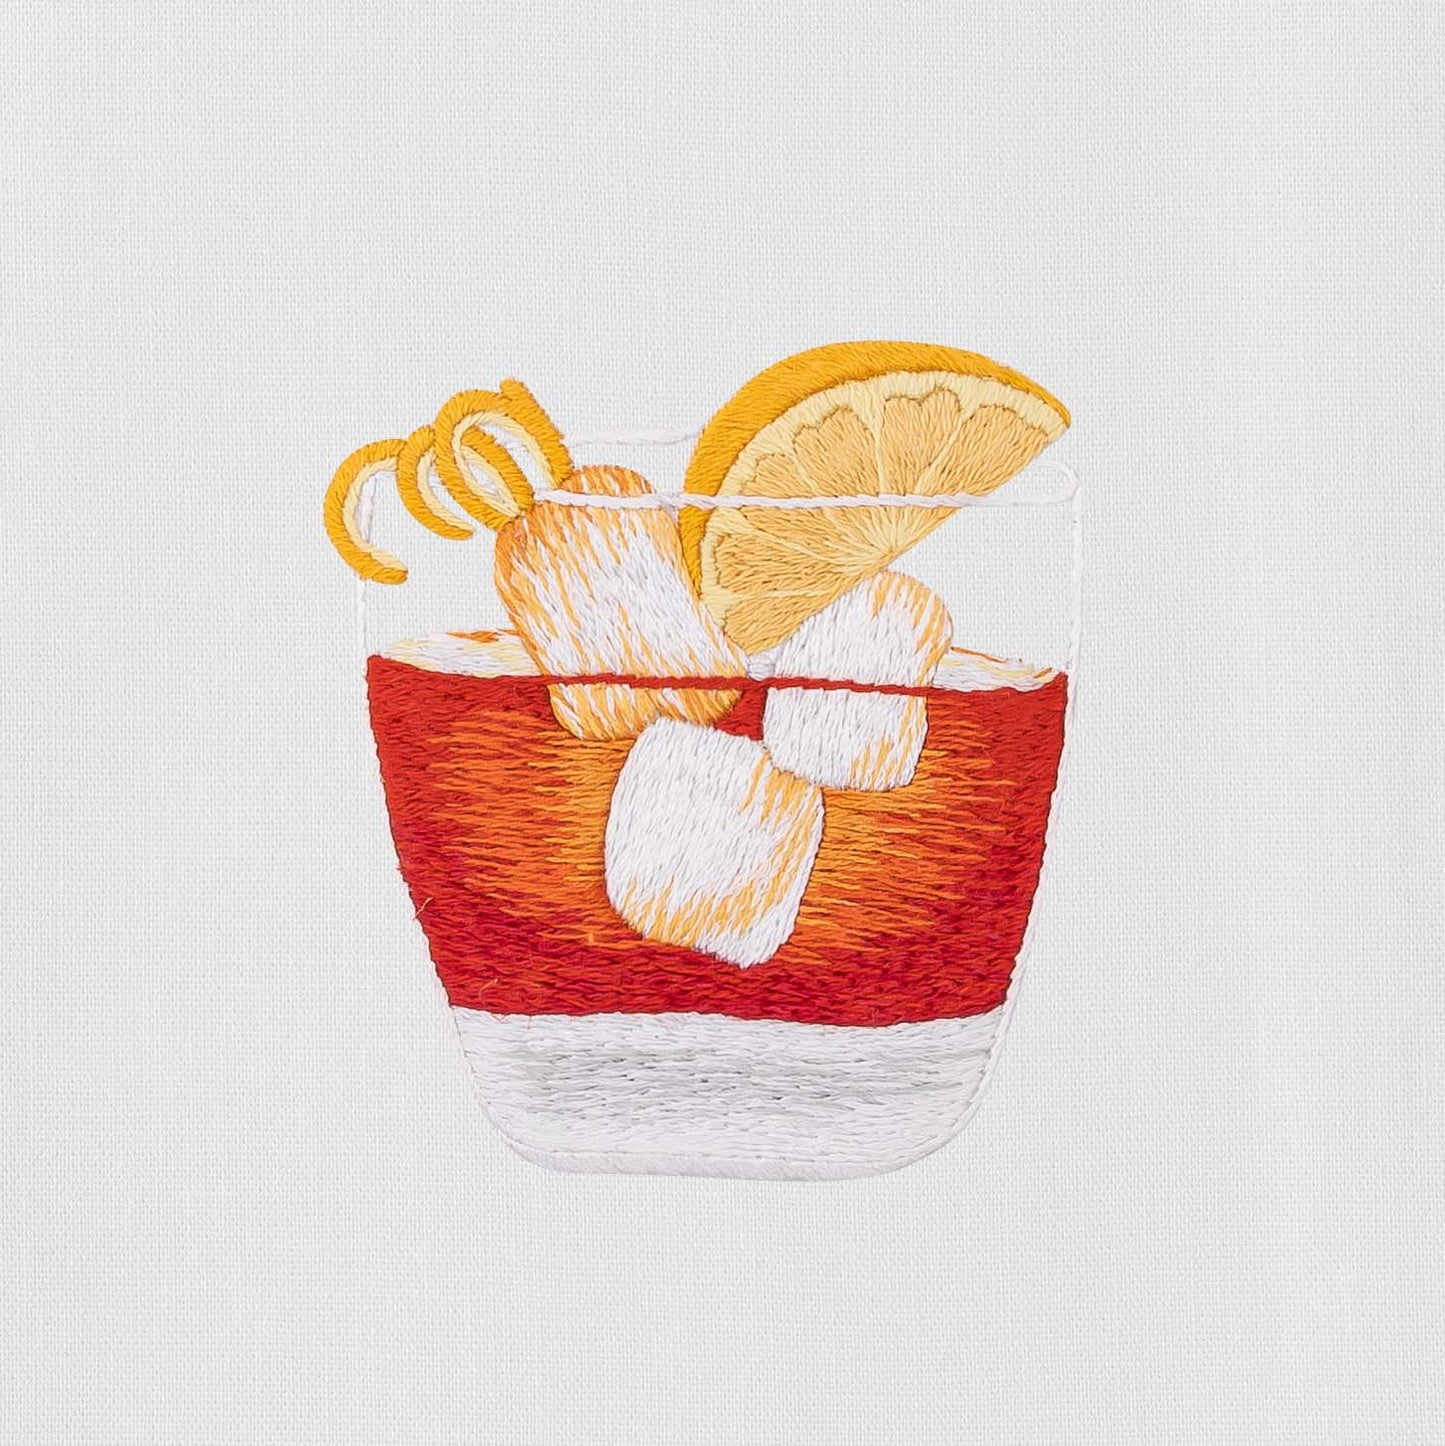 Negroni Cocktail Hand Towel